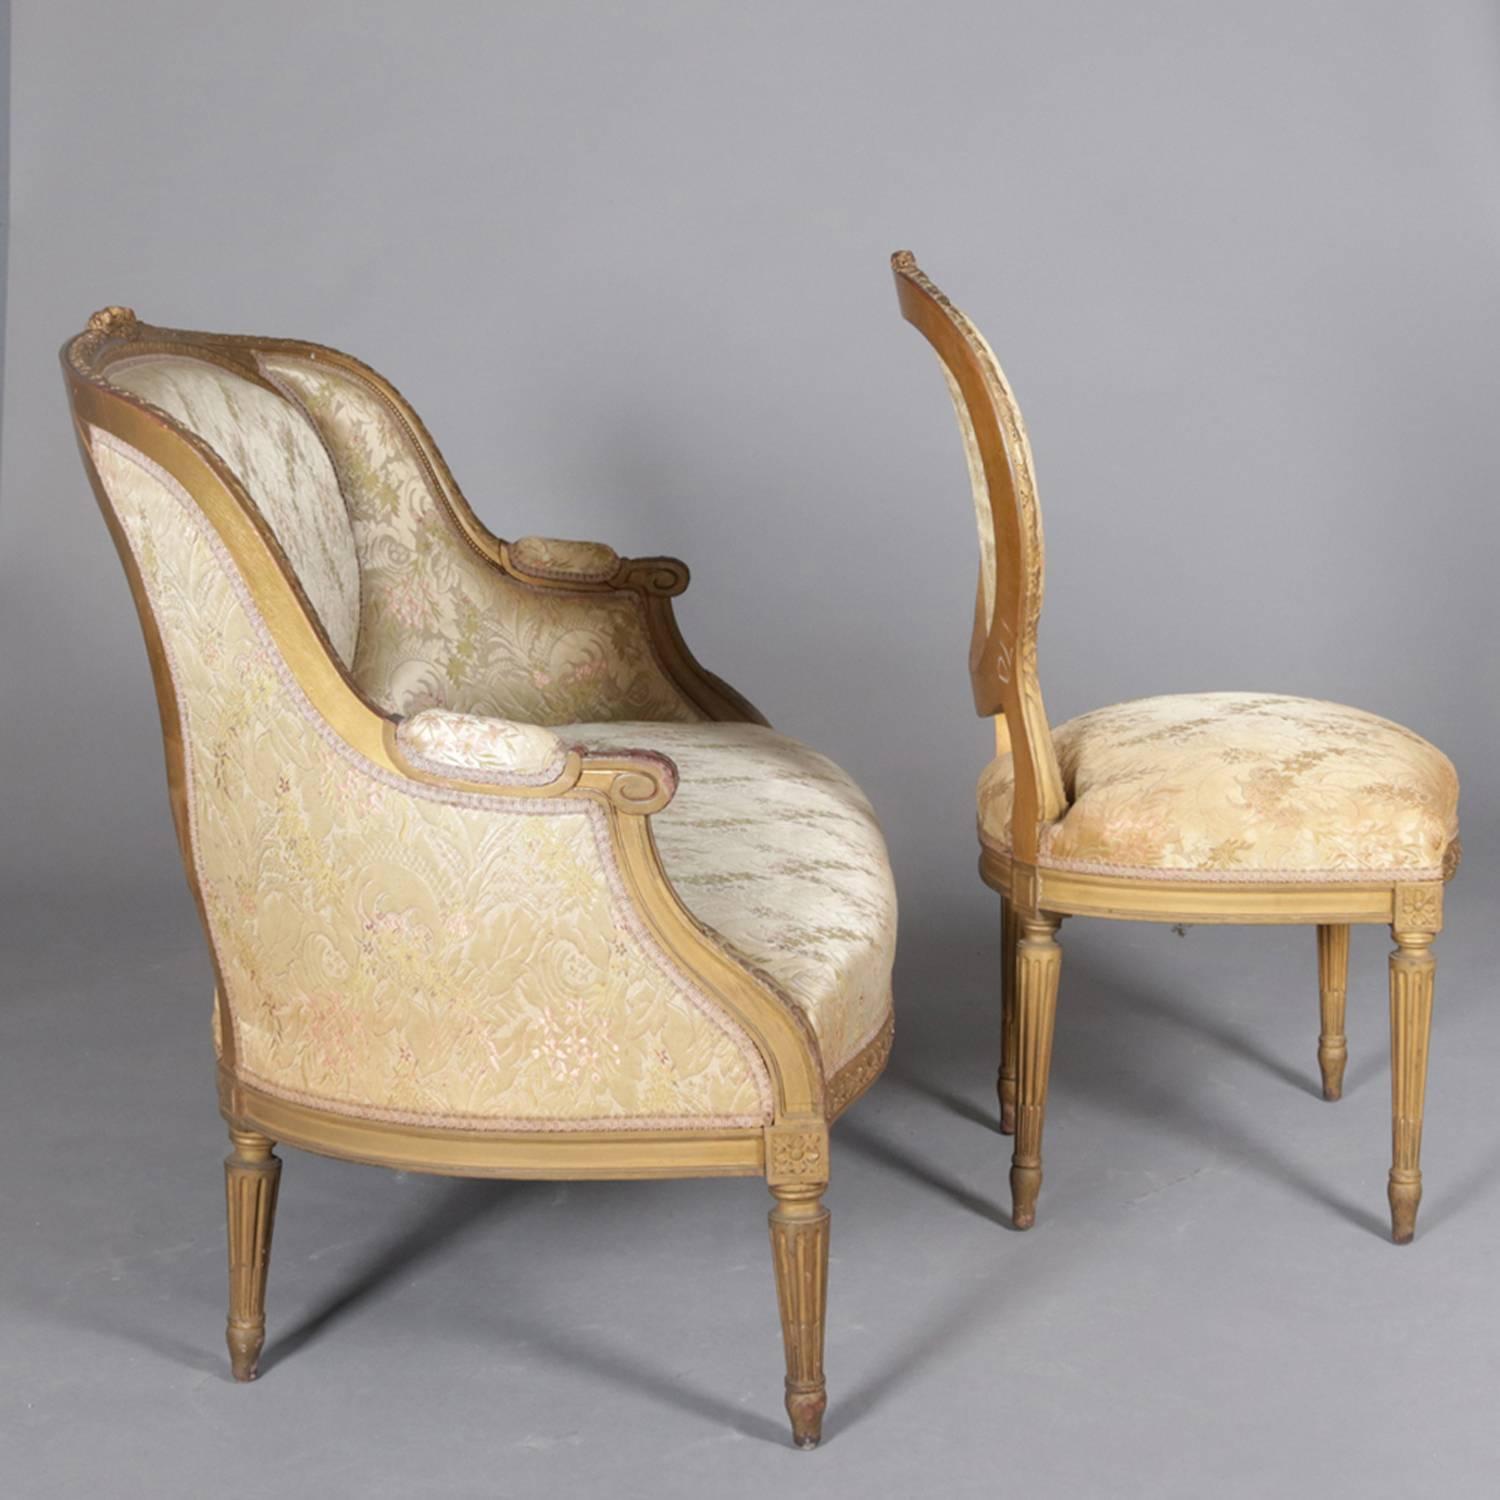 Two-piece French Louis XVI style parlor set features carved giltwood frame with scroll form arms and seated on tapered and reeded legs, upholstered seats and backs, set includes settee and side chair, circa 1890

Measures - settee: 38.5